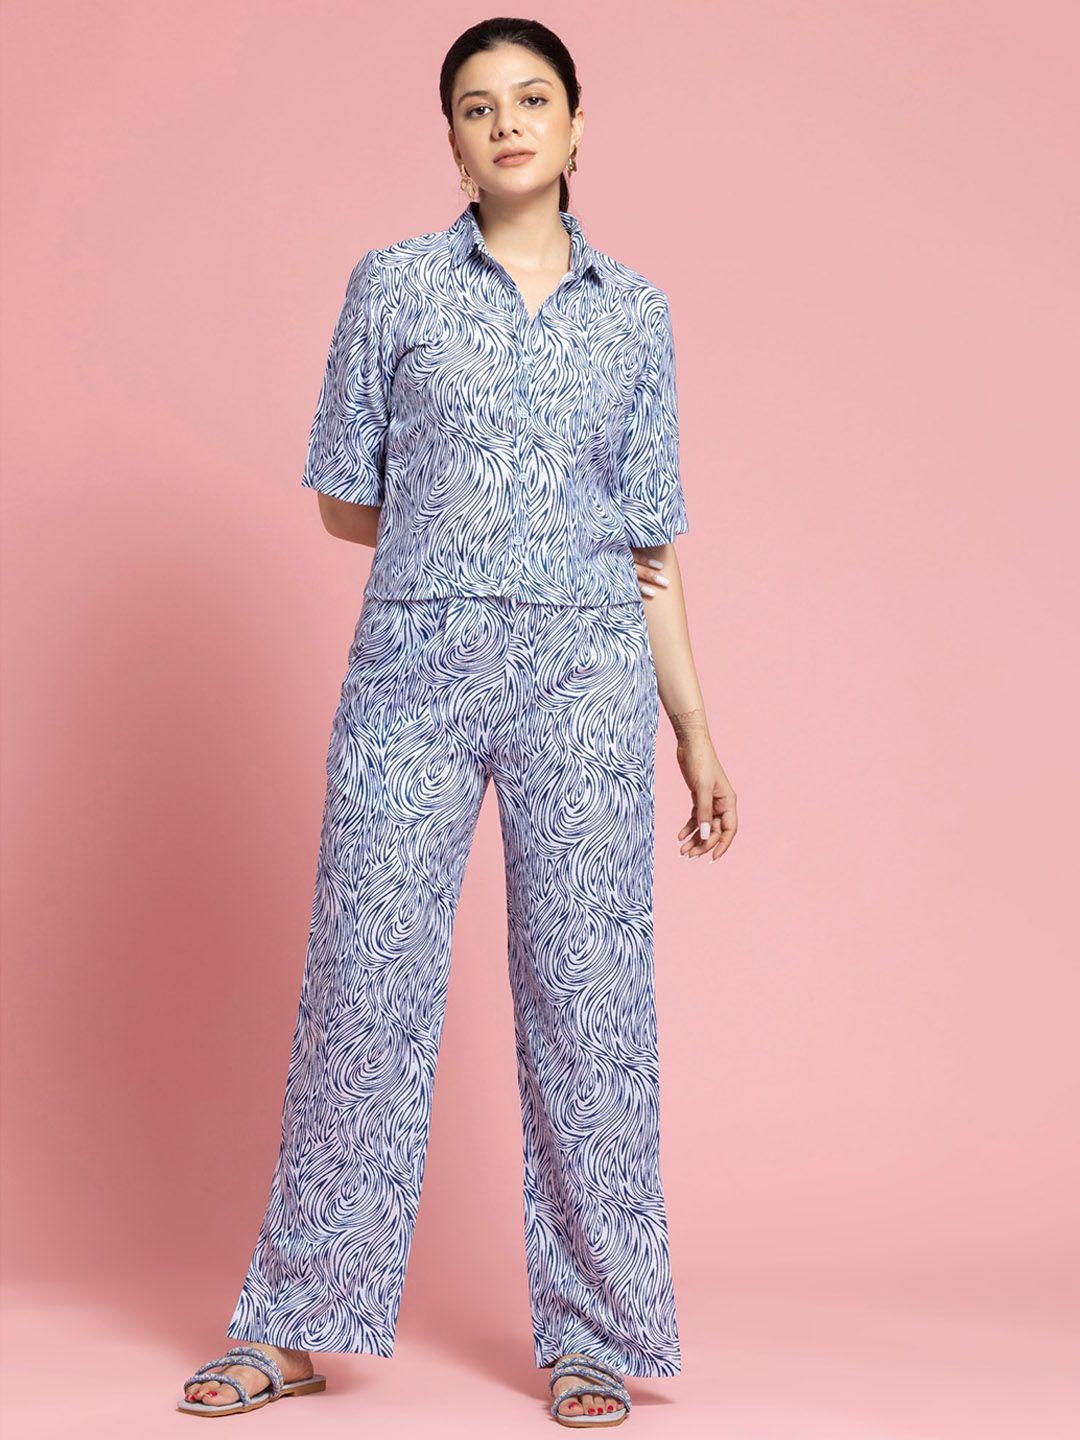 sew-you-soon-printed-shirt-with-trousers-co-ords